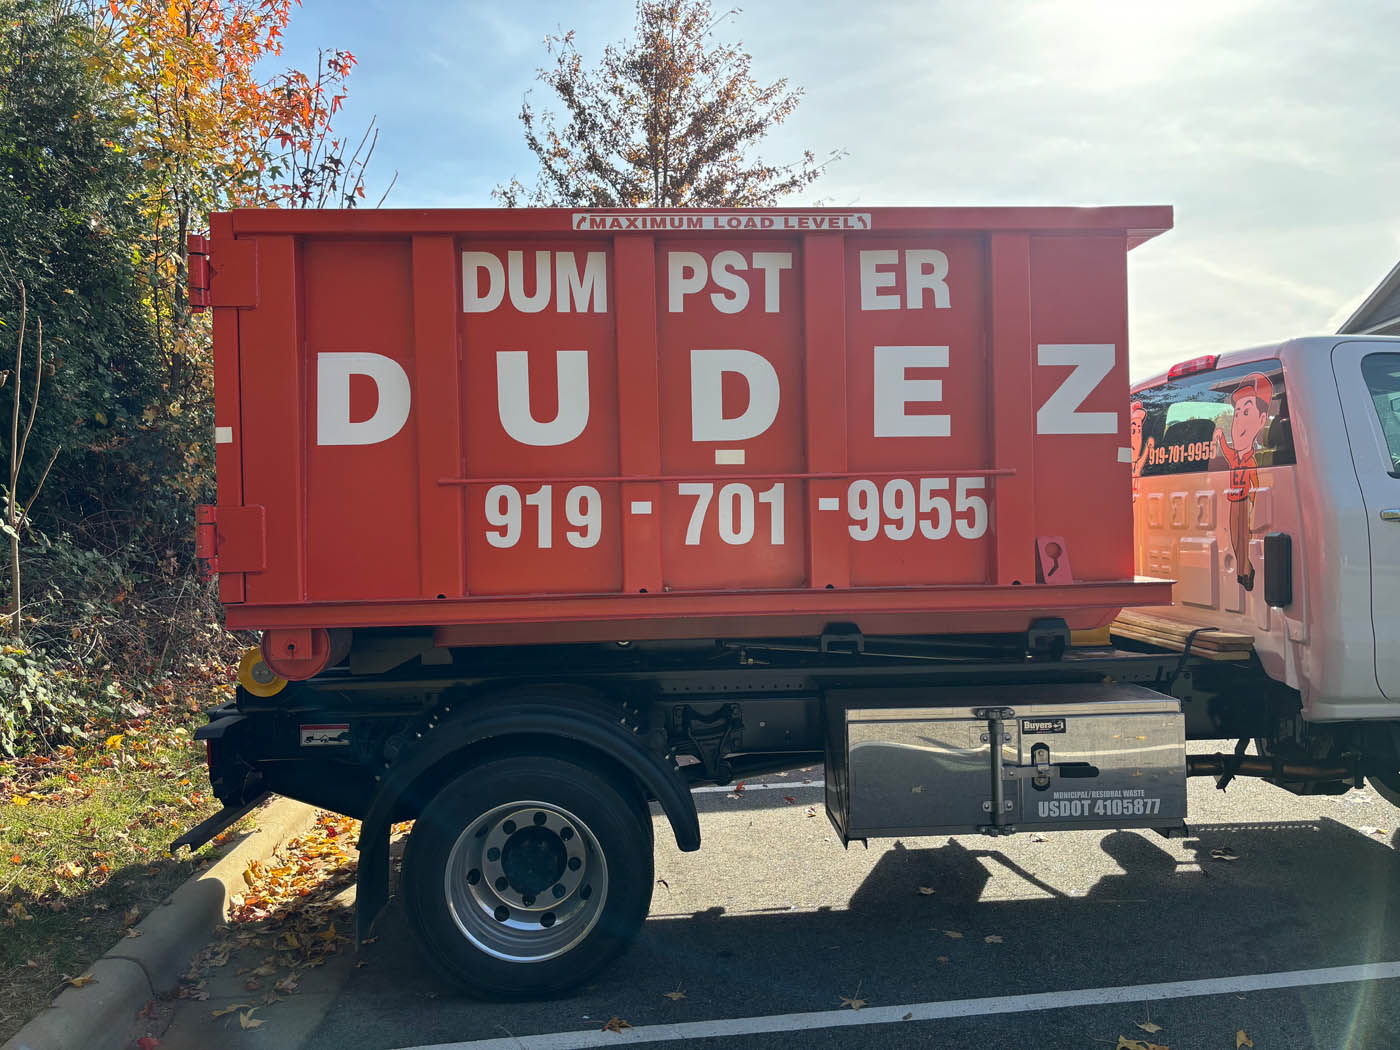 An orange Dumpster Dudez dumpster ready to provide Reading / Berks County junk haul away services.